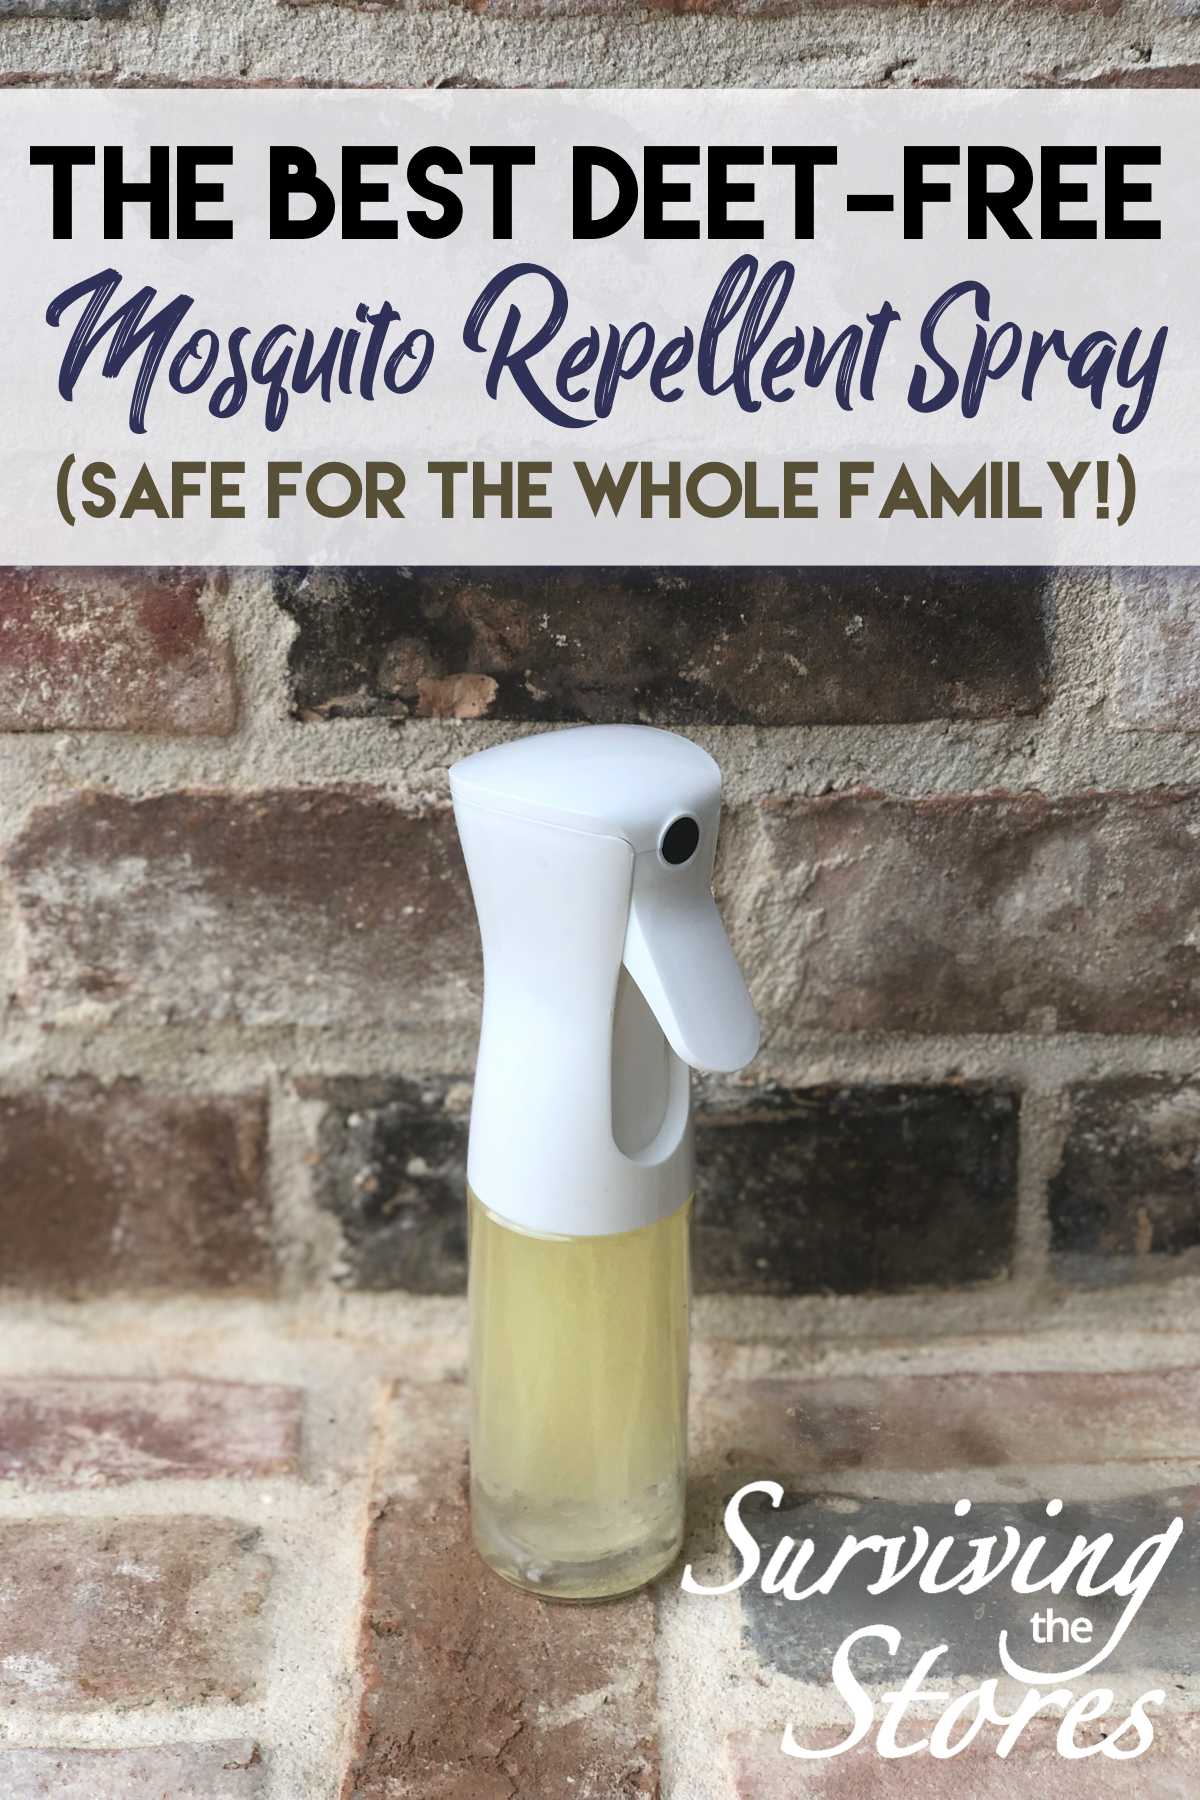 Homemade Mosquito Repellent Deet Free Spray That Works Surviving The Stores